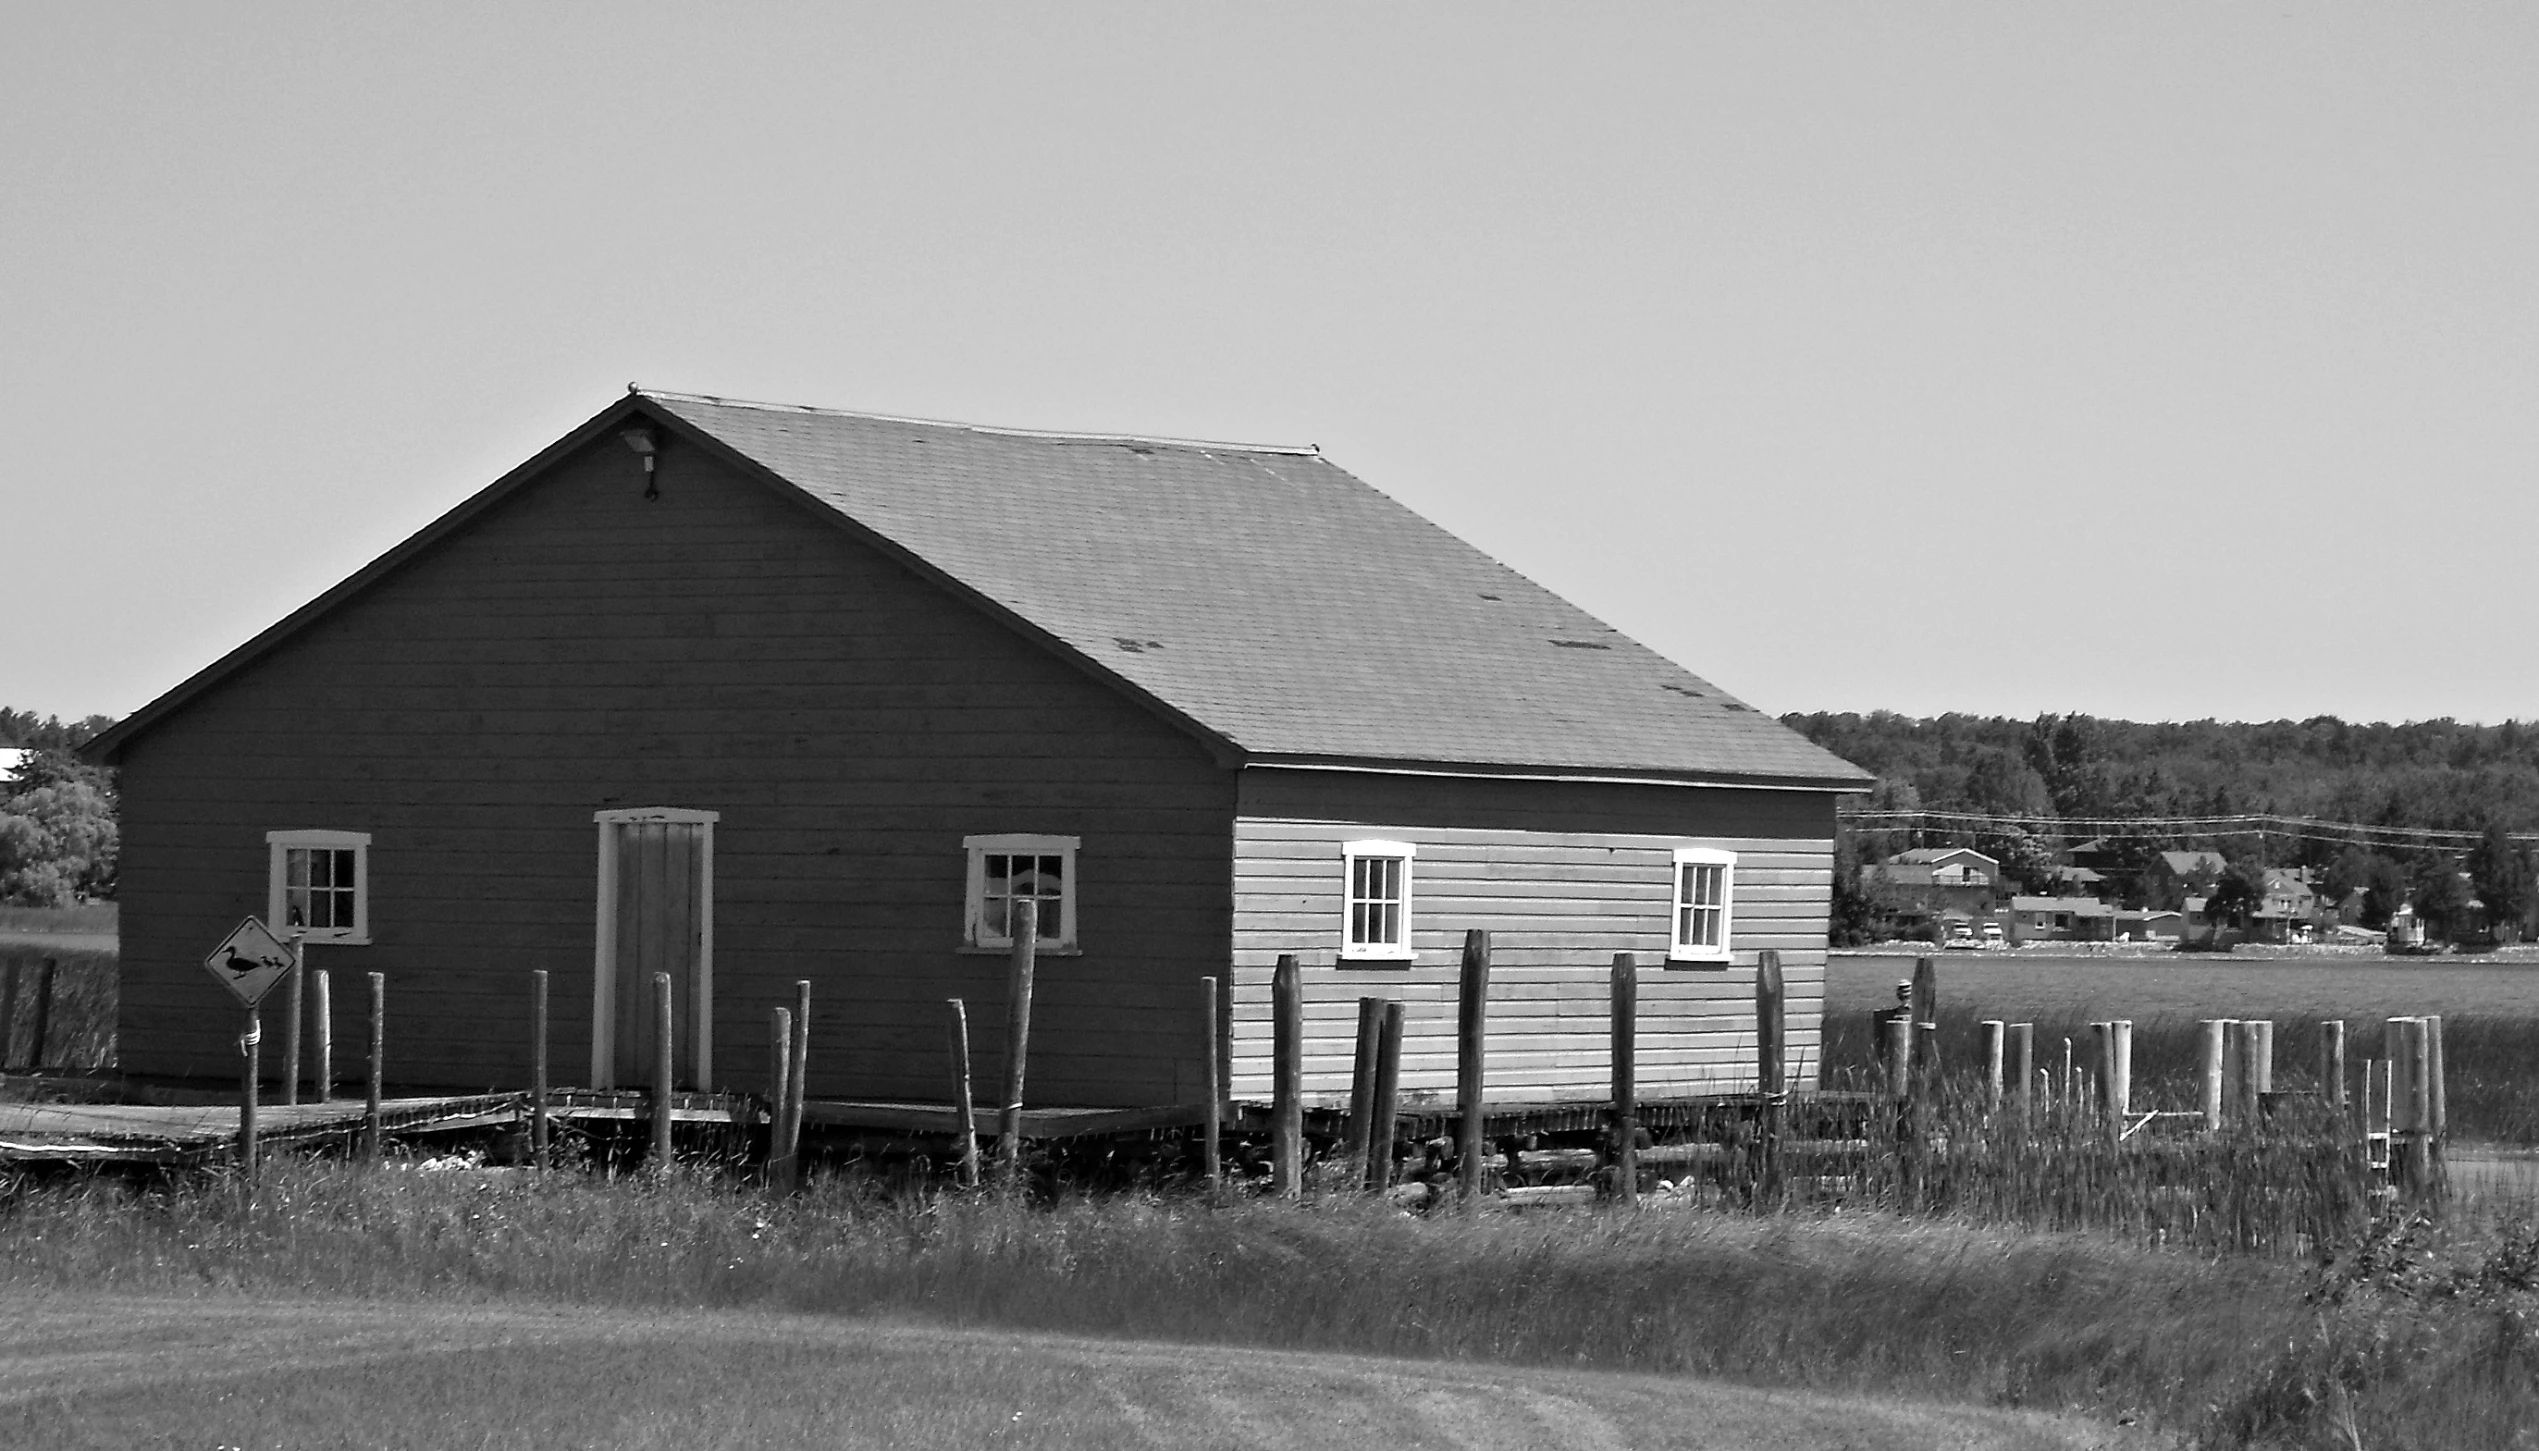 a black and white po of a house near a field